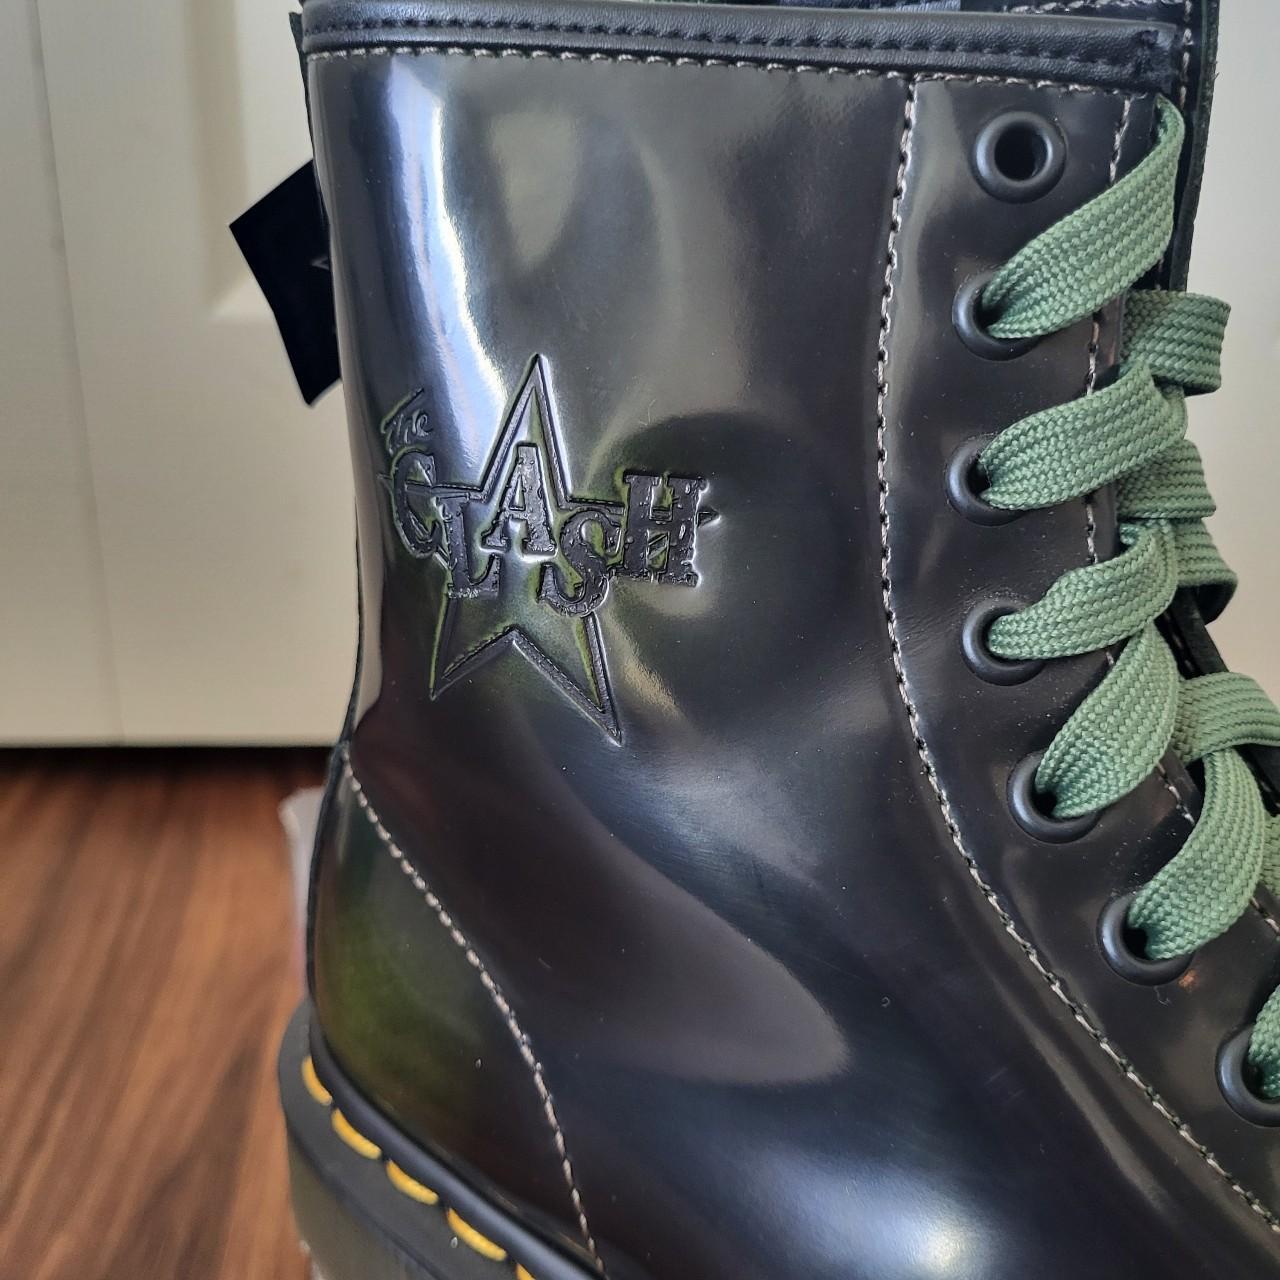 Dr. Martens Women's Black and Green Boots (3)